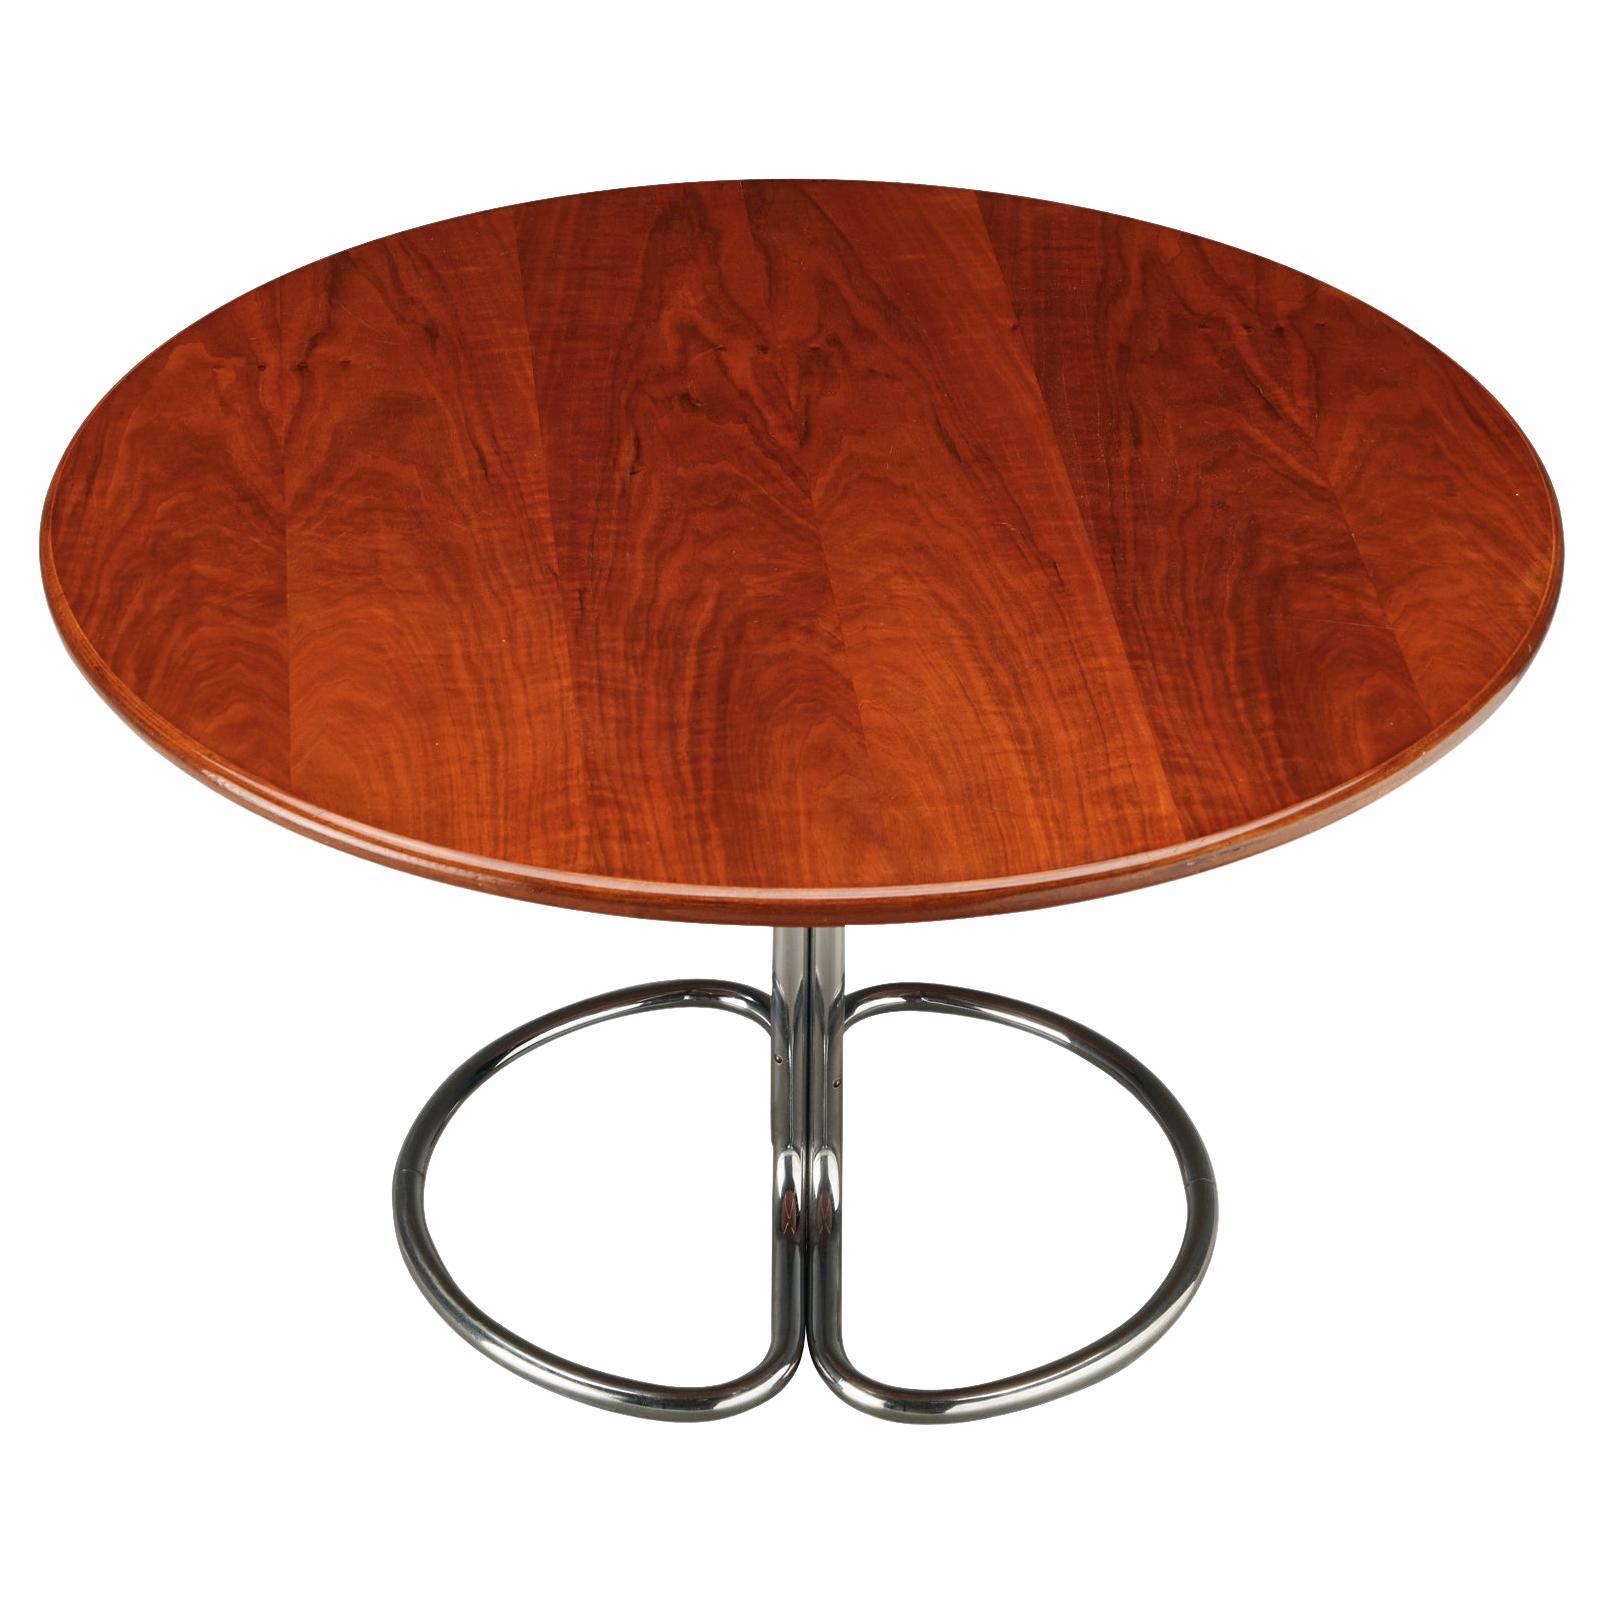 Giotto Stoppino for Bernini Round Dining Table 'Maia' in Walnut and Metal  For Sale